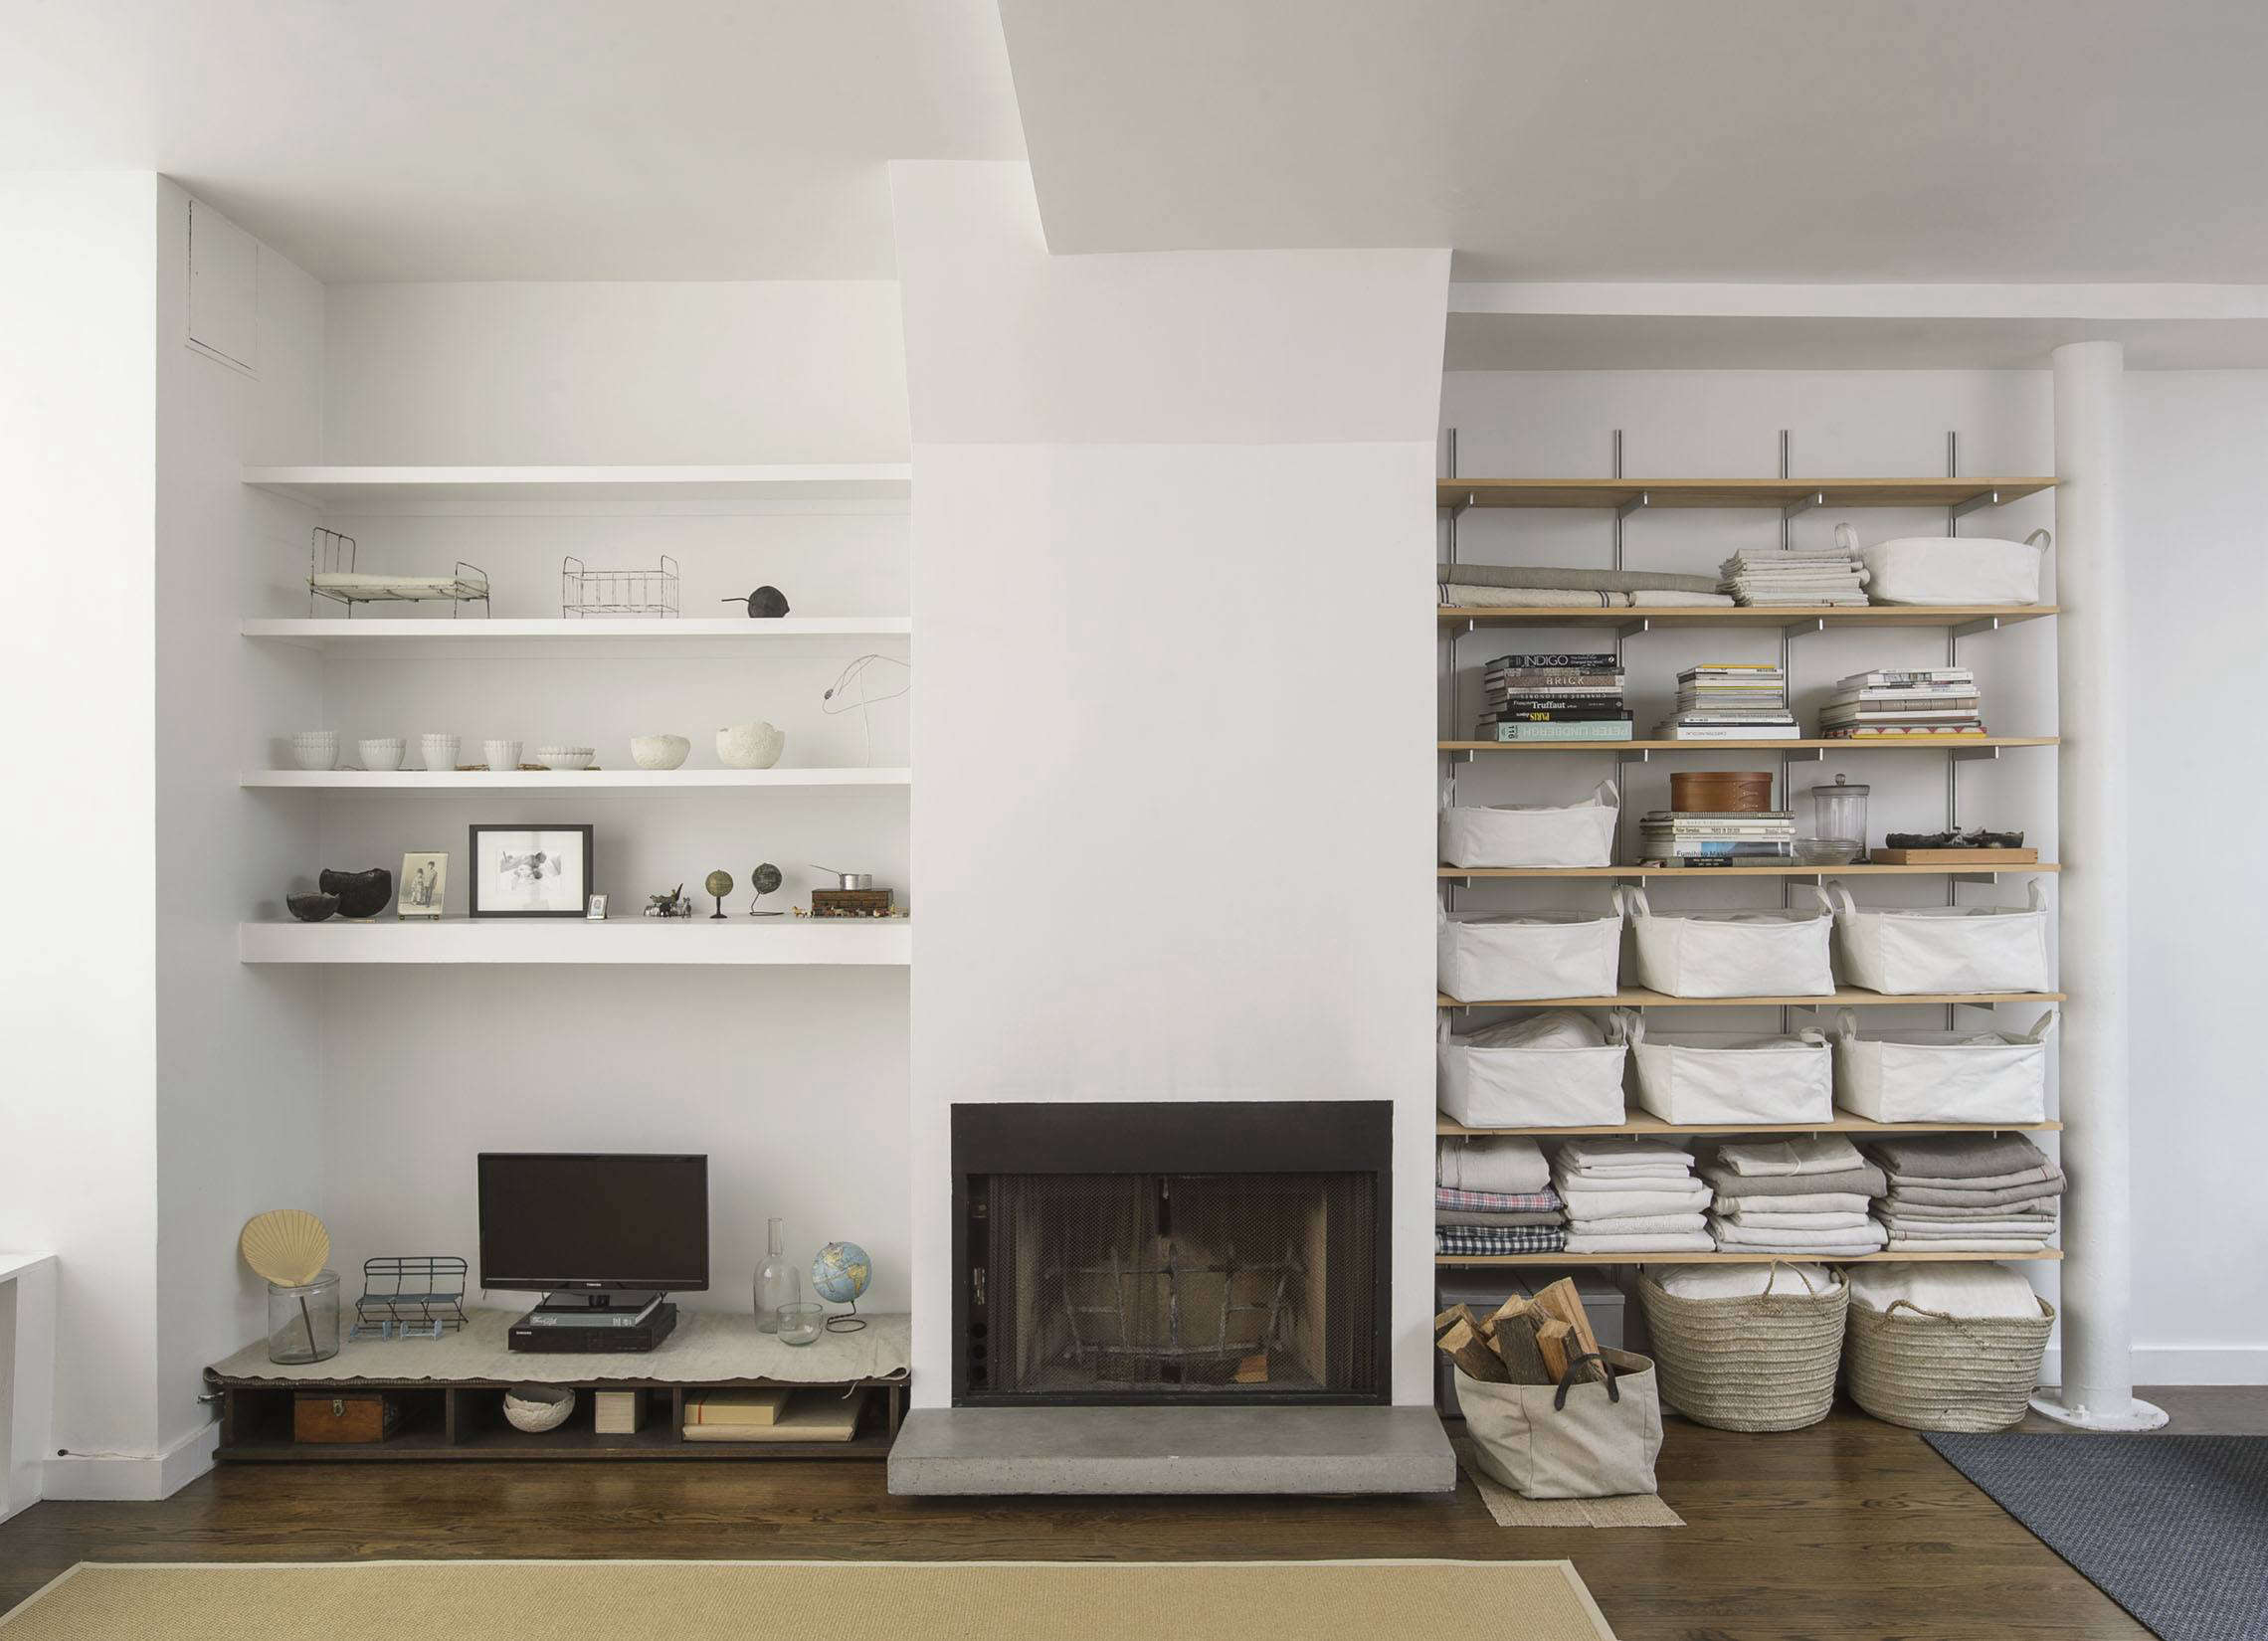 Warm Minimalism 10 of Our Favorite Contemporary Fireplaces from the Remodelista Archives portrait 3